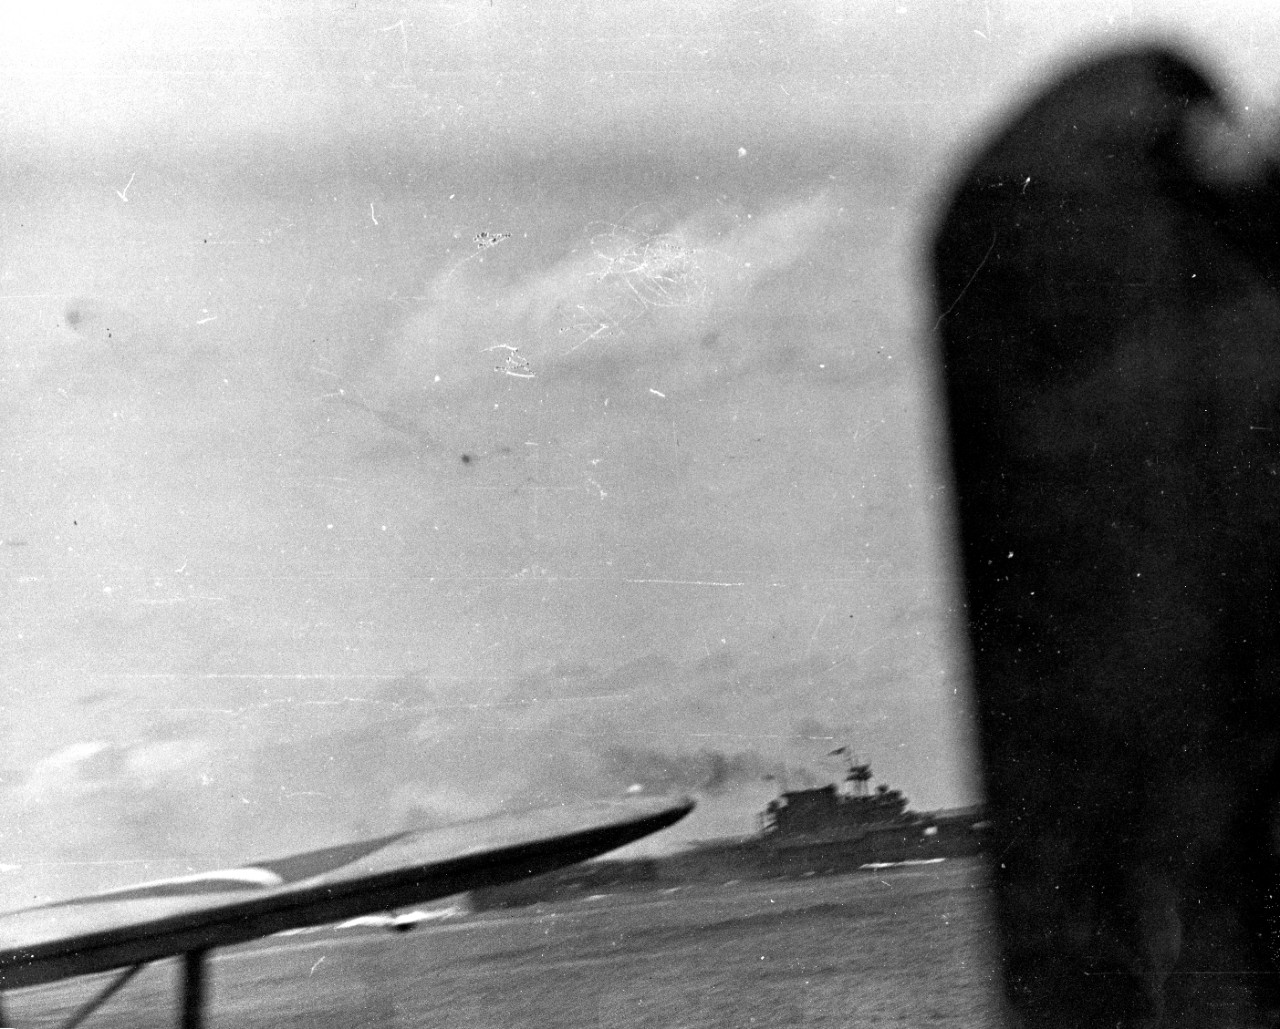 Photo #: 80-G-21641  Battle of Midway, June 1942